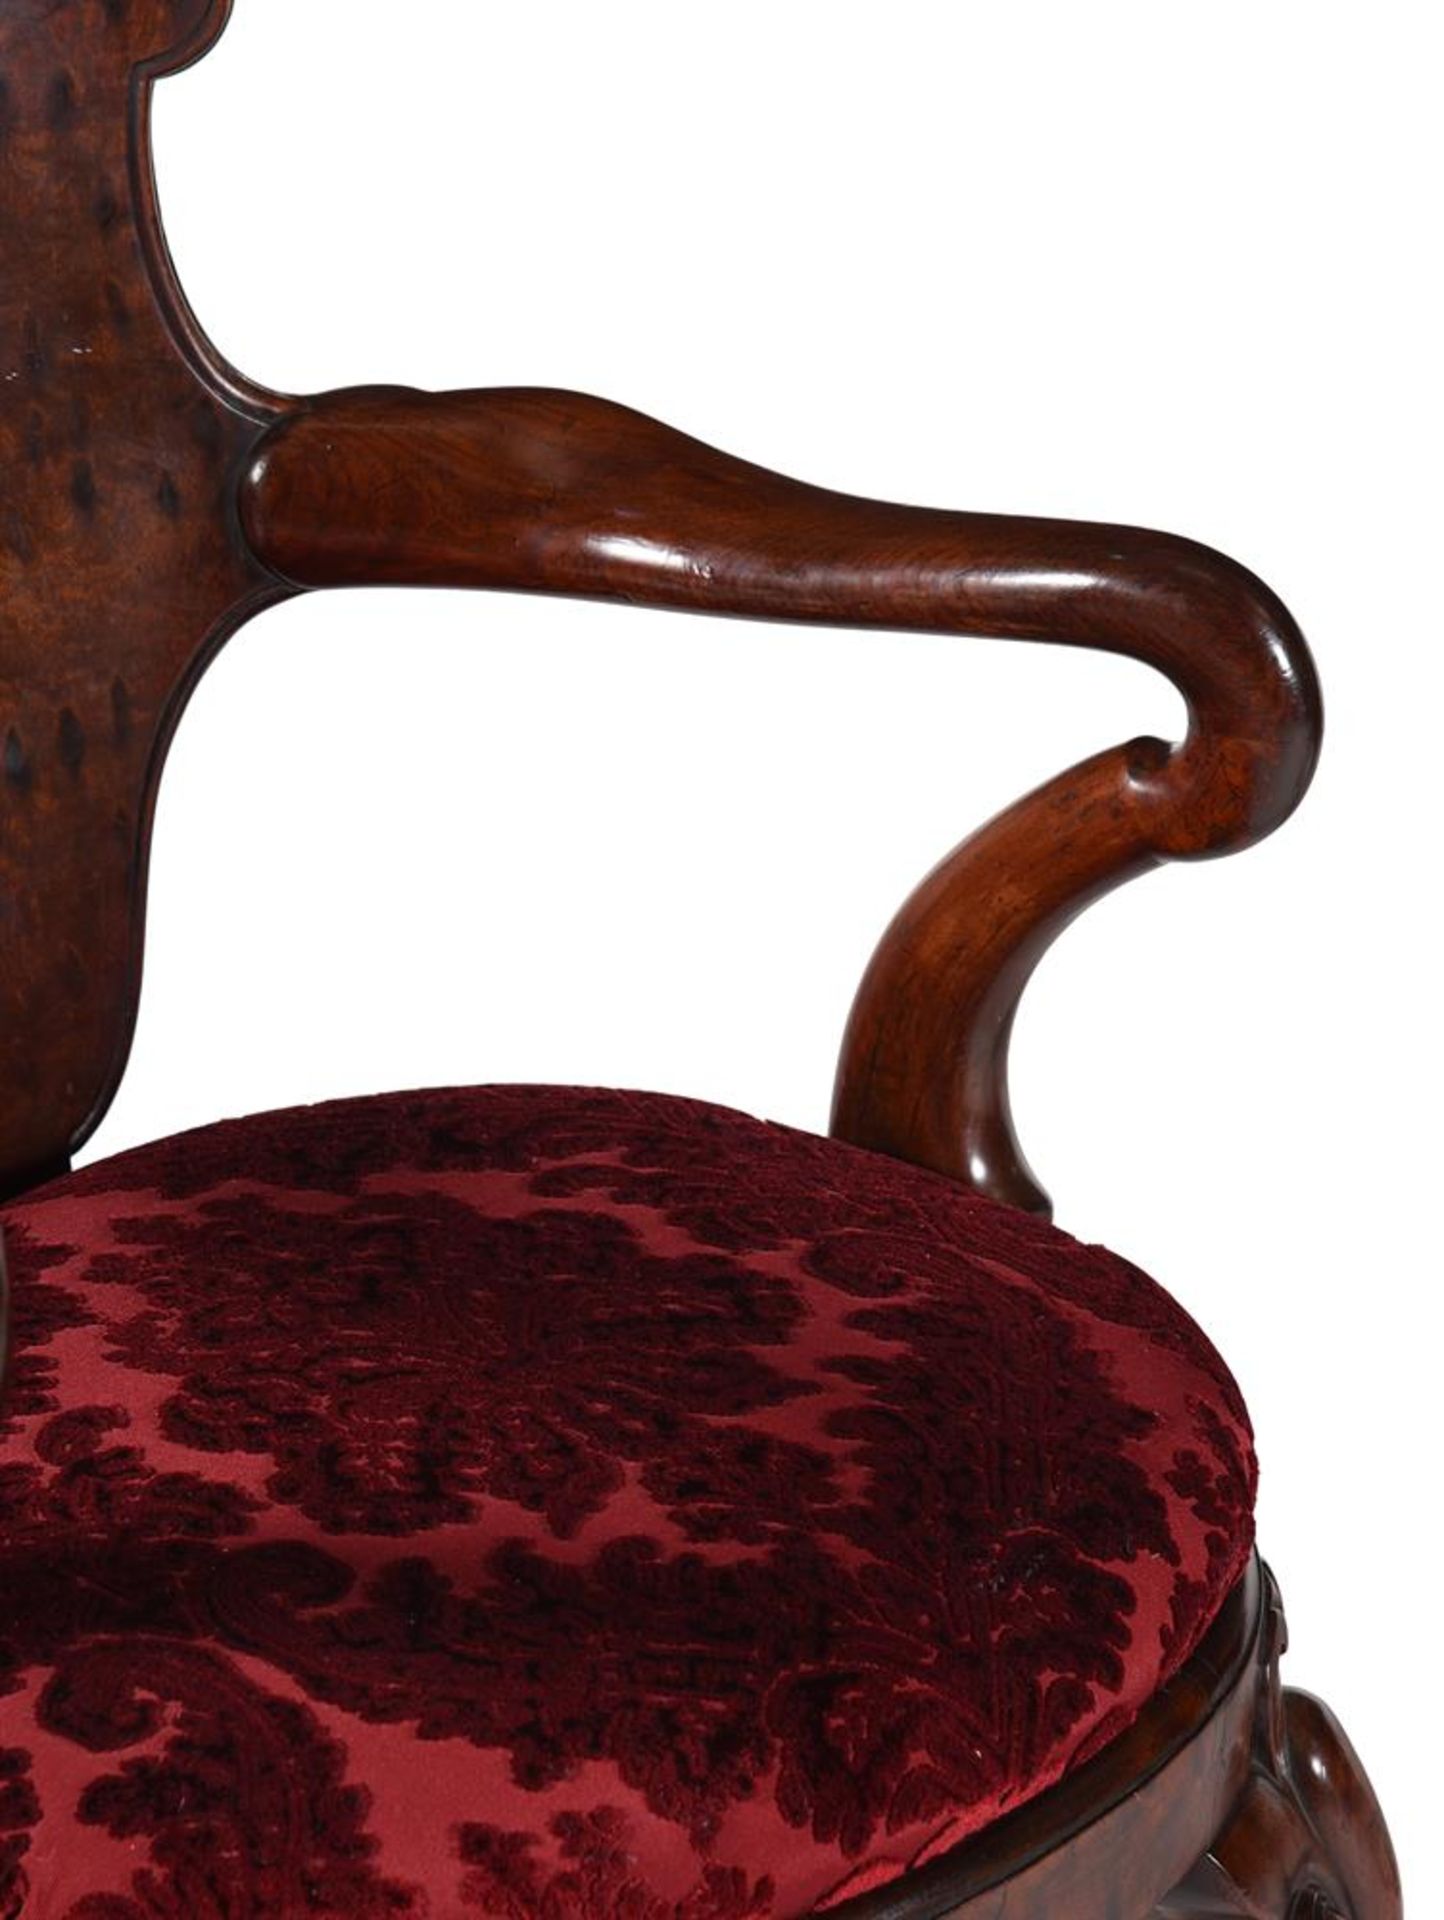 A PAIR OF WILLIAM IV MAHOGANY AND 'PLUM PUDDING' MAHOGANY ARMCHAIRS, ATTRIBUTED TO GILLOWS - Image 3 of 6